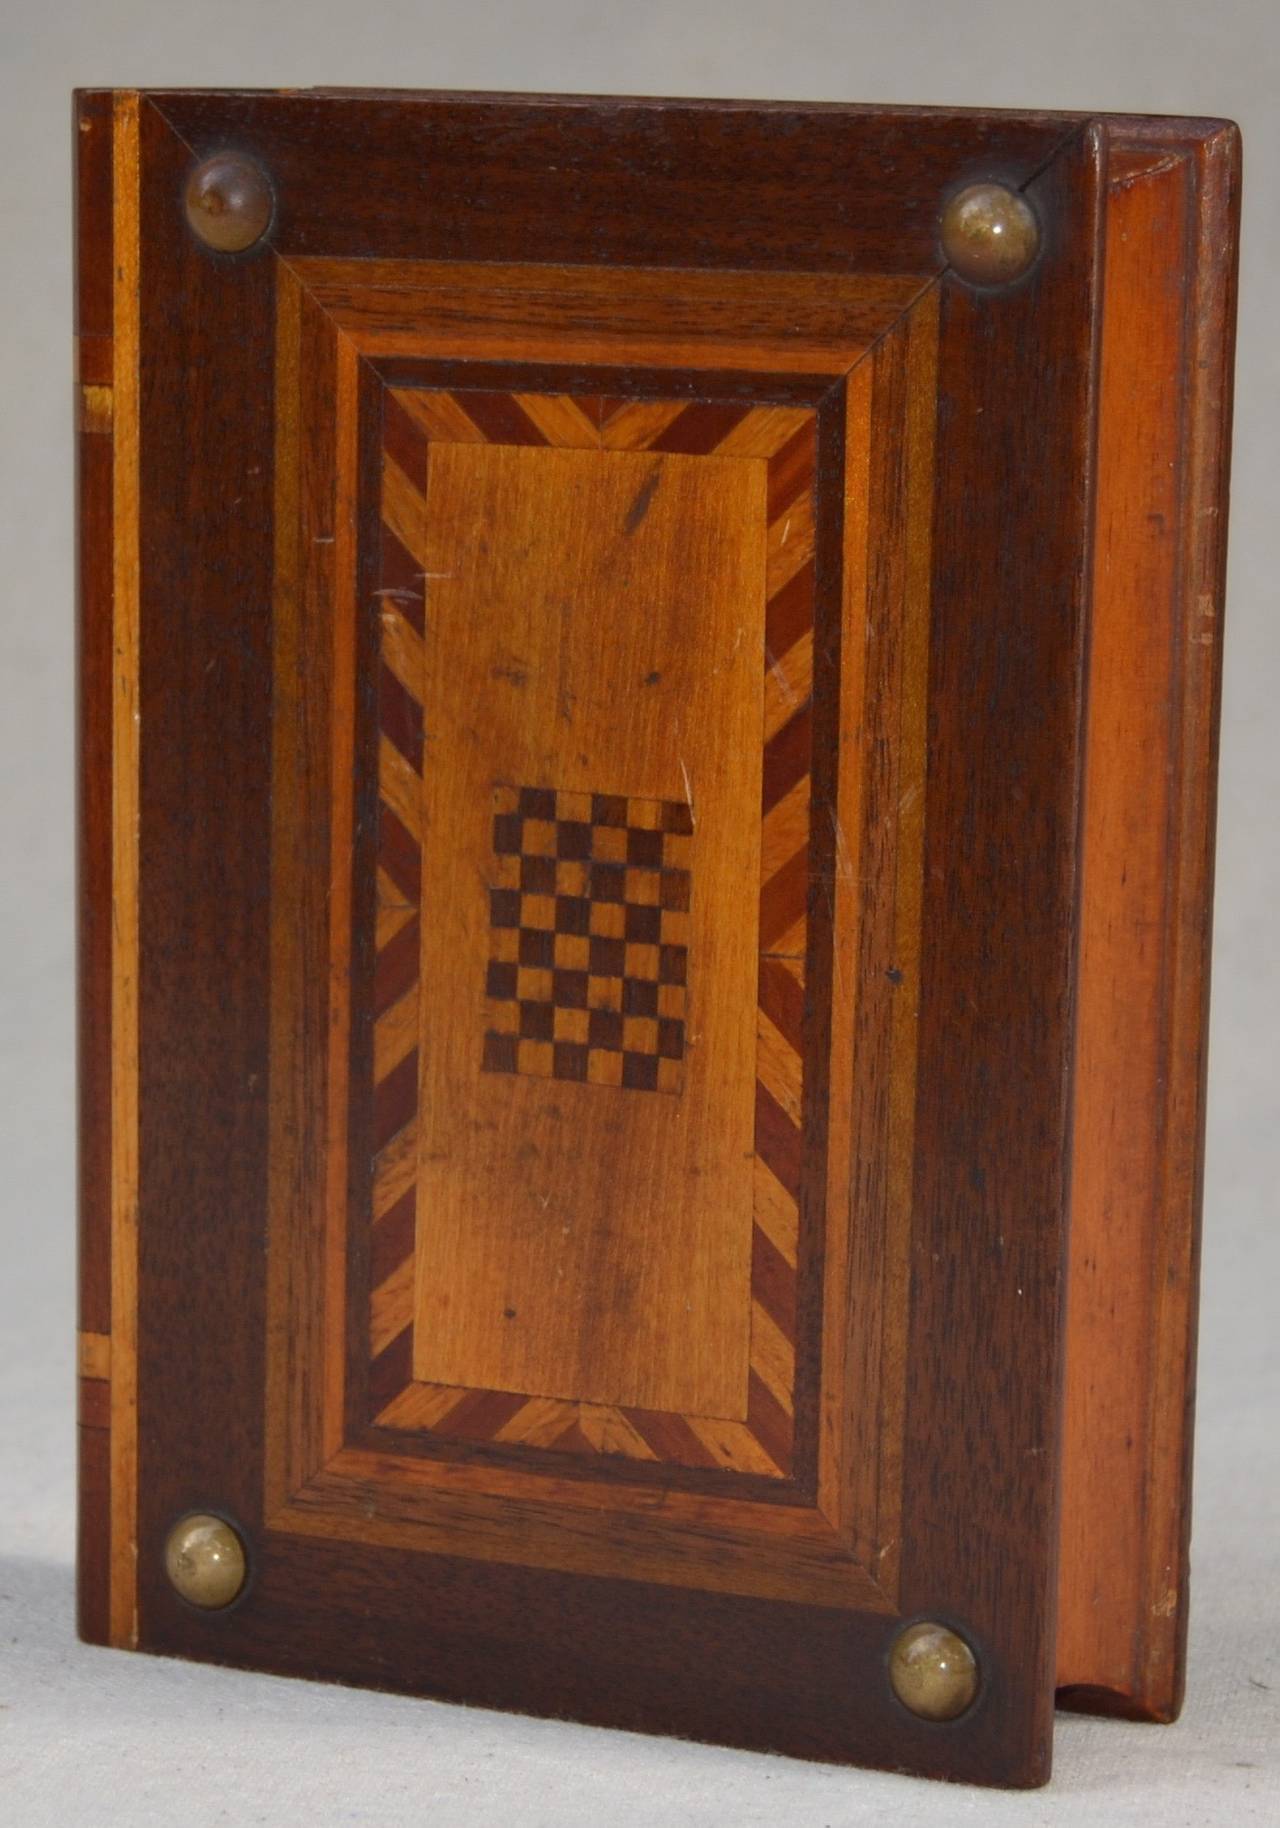 A folk art marquetry book box with a secret opening mechanism. checkerboard design with brass nail heads